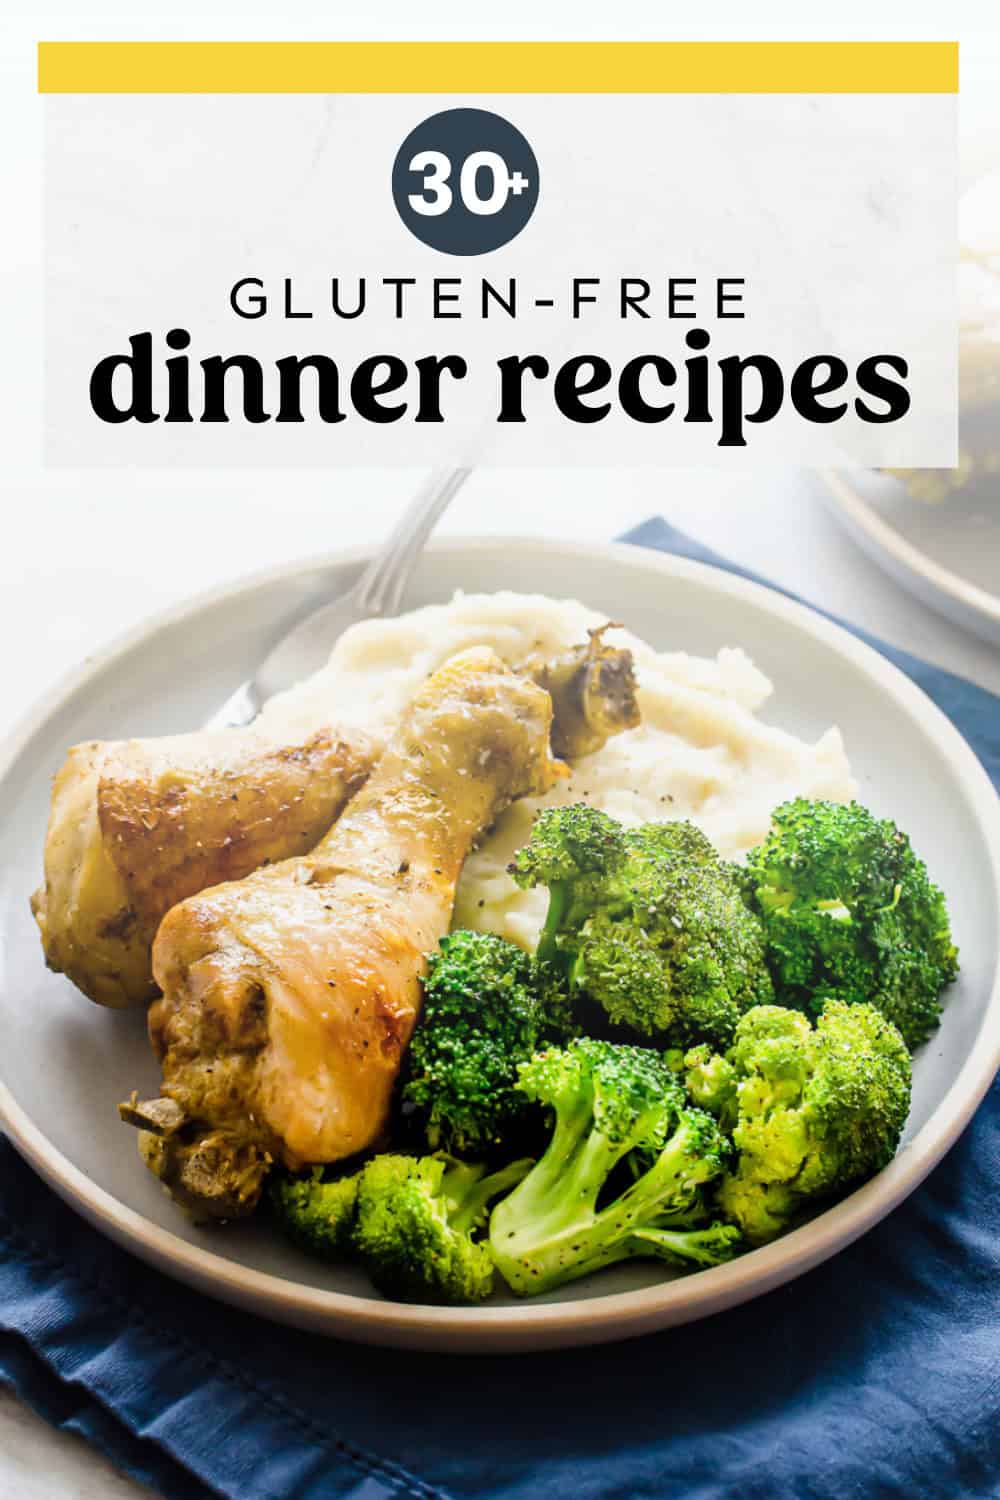 Gluten free dinner of drumsticks, steamed broccoli, and mashed potatoes on a plate.